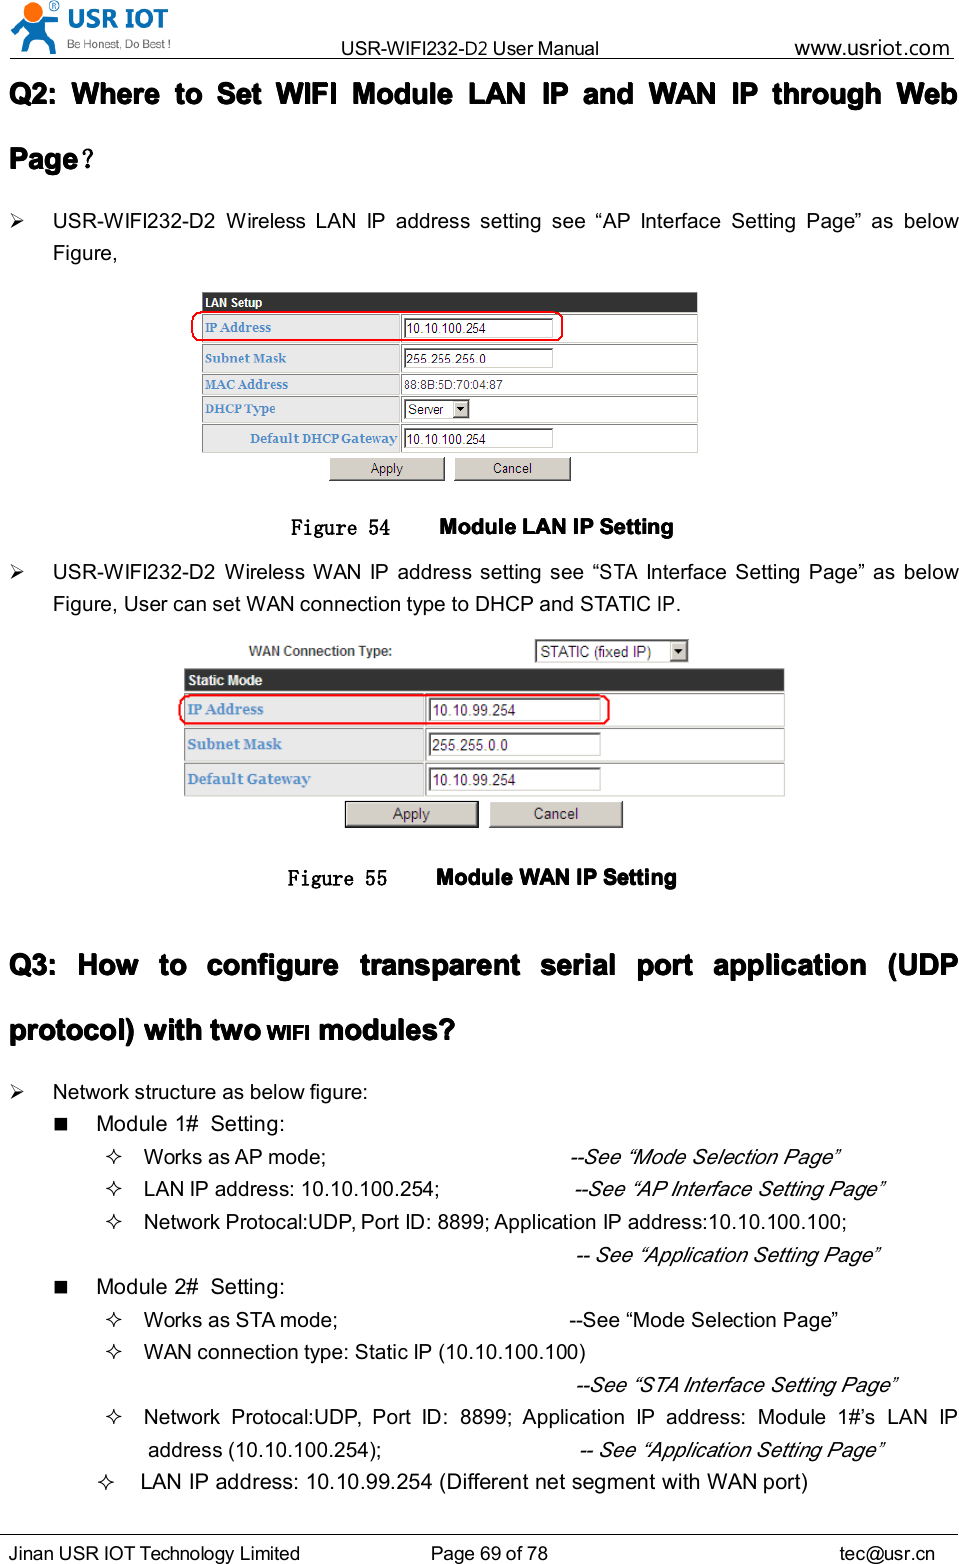 USR-WIFI232- D2 User Manual www.usr iot .comJinan USR IOT Technology Limited Page 69 of 78 tec@usr.cnQ2:Q2:Q2:Q2: WhereWhereWhereWhere totototo SetSetSetSet WIFIWIFIWIFIWIFI ModuleModuleModuleModule LANLANLANLAN IPIPIPIP andandandand WANWANWANWAN IPIPIPIP throughthroughthroughthrough WebWebWebWebPagePagePagePage ？USR-WIFI232-D2 Wireless LAN IP address setting see “ AP Interface Setting Page ” as belowFigure,Figure 54 ModuleModuleModuleModule LANLANLANLAN IPIPIPIP SettingSettingSettingSettingUSR-WIFI232-D2 Wireless WAN IP address setting see “STAInterface Setting Page ” as belowFigure, User can set WAN connection type to DHCP and STATICIP.Figure 55 ModuleModuleModuleModule WANWANWANWAN IPIPIPIP SettingSettingSettingSettingQ3:Q3:Q3:Q3: HowHowHowHow totototo configureconfigureconfigureconfigure transparenttransparenttransparenttransparent serialserialserialserial portportportport applicationapplicationapplicationapplication (UDP(UDP(UDP(UDPprotocol)protocol)protocol)protocol) withwithwithwith twotwotwotwo WIFIWIFIWIFIWIFI modules?modules?modules?modules?Network structure as below figure:Module 1# Setting:Works as AP mode;--See “ Mode Selection Page”LAN IP address: 10.10.100.254;--See “ AP Interface Setting Page”Network Protocal:UDP, Port ID: 8899; Application IP address:10.10.100.100;-- See “ Application Setting Page”Module 2# Setting:Works as STA mode; --See “ Mode Selection Page ”WAN connection type: Static IP (10.10.100.100)--See “ STA Interface Setting Page”Network Protocal:UDP, Port ID: 8899; Application IP address: Module 1# ’ s LAN IPaddress (10.10.100.254);-- See “ Application Setting Page”LAN IP address: 10.10.99.254 (Different net segment with WAN port)